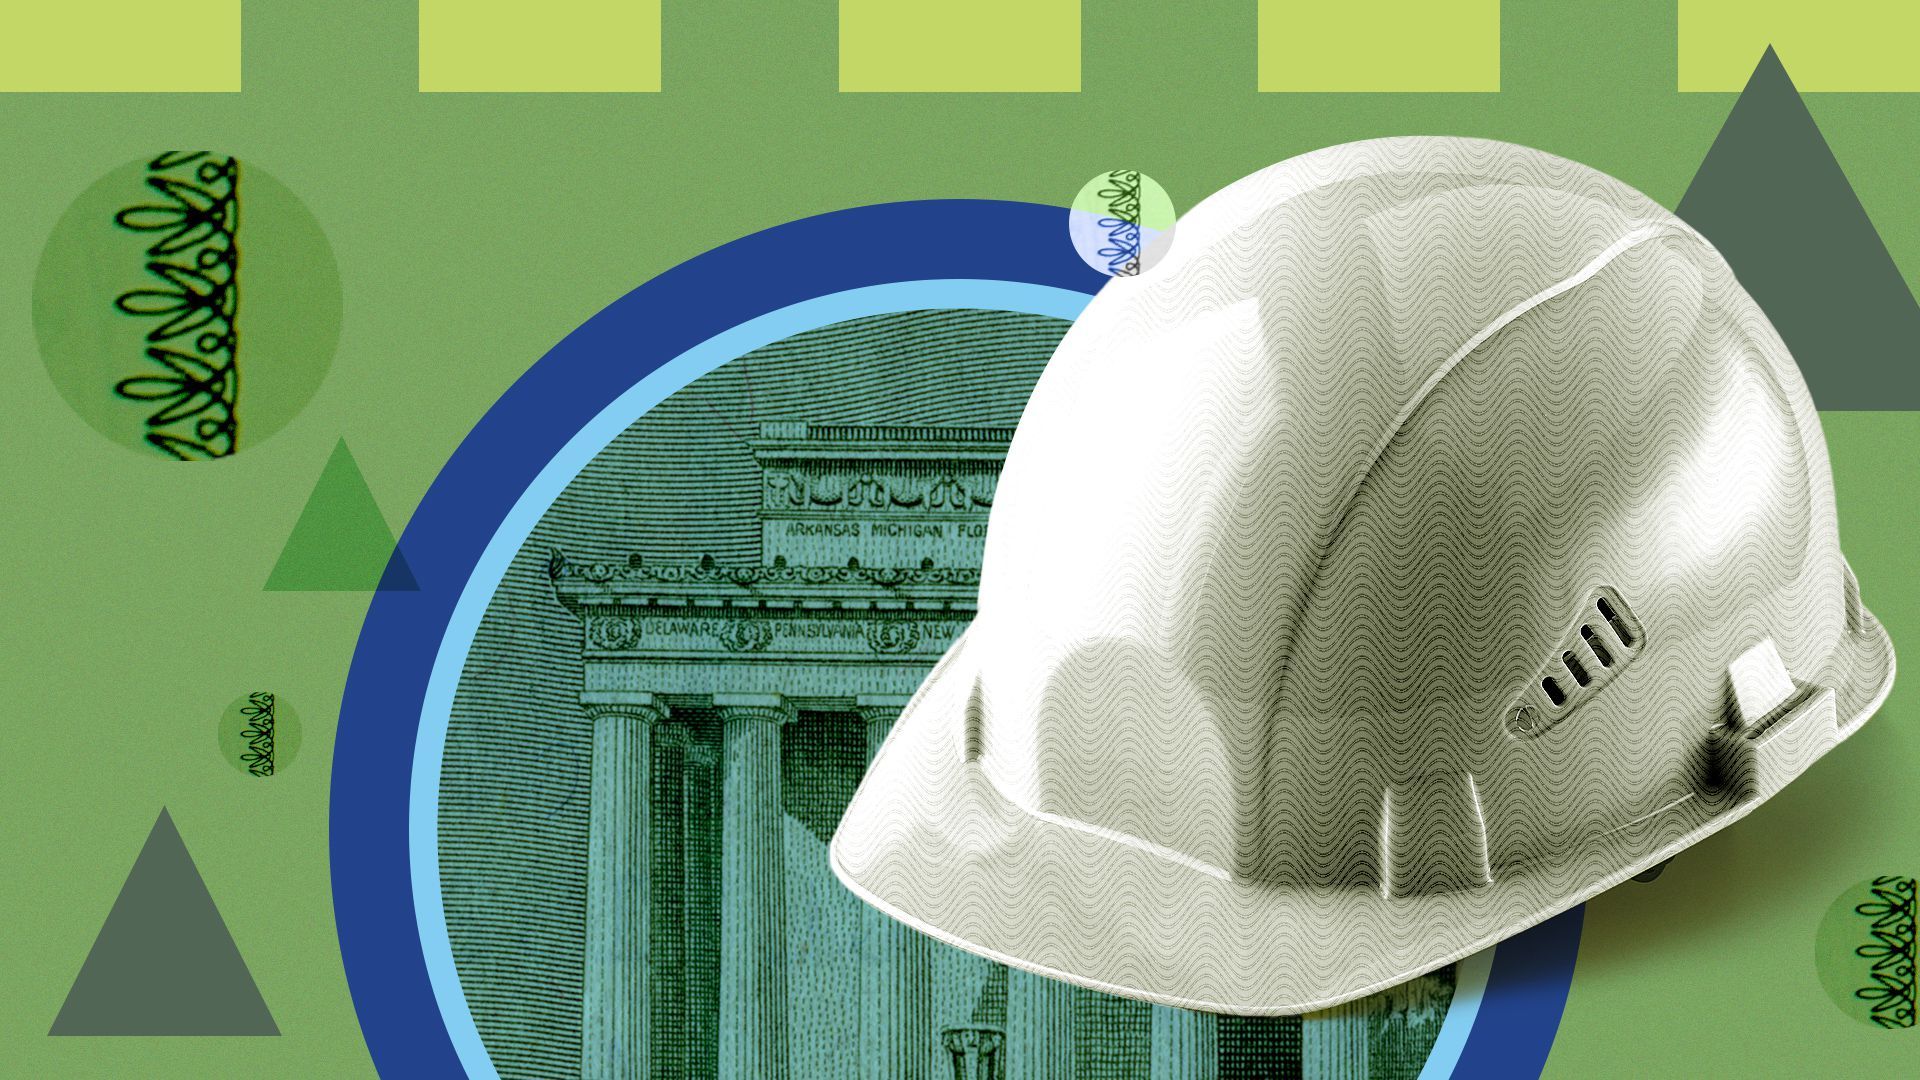 Illustration of a hardhat surrounded by abstract shapes and dollar elements.